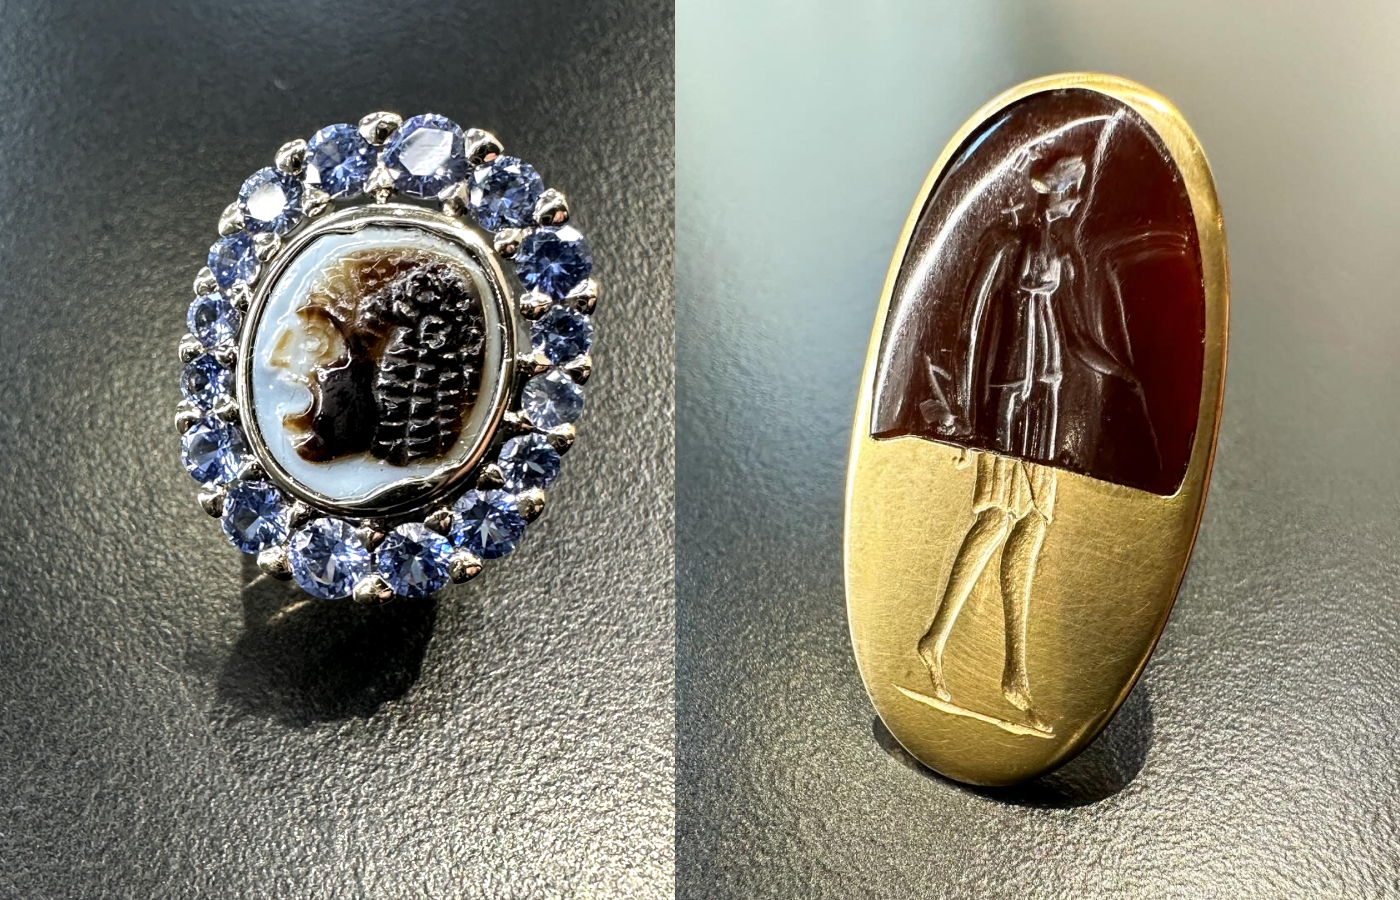 Maison Auclert Camée Théâtre ring (left) with a rare Roman cameo in brown and bluish-grey agate and blue-grey sapphires in 18k gold and the Diane brooch (right) with a sardonyx intaglio, set in yellow gold 